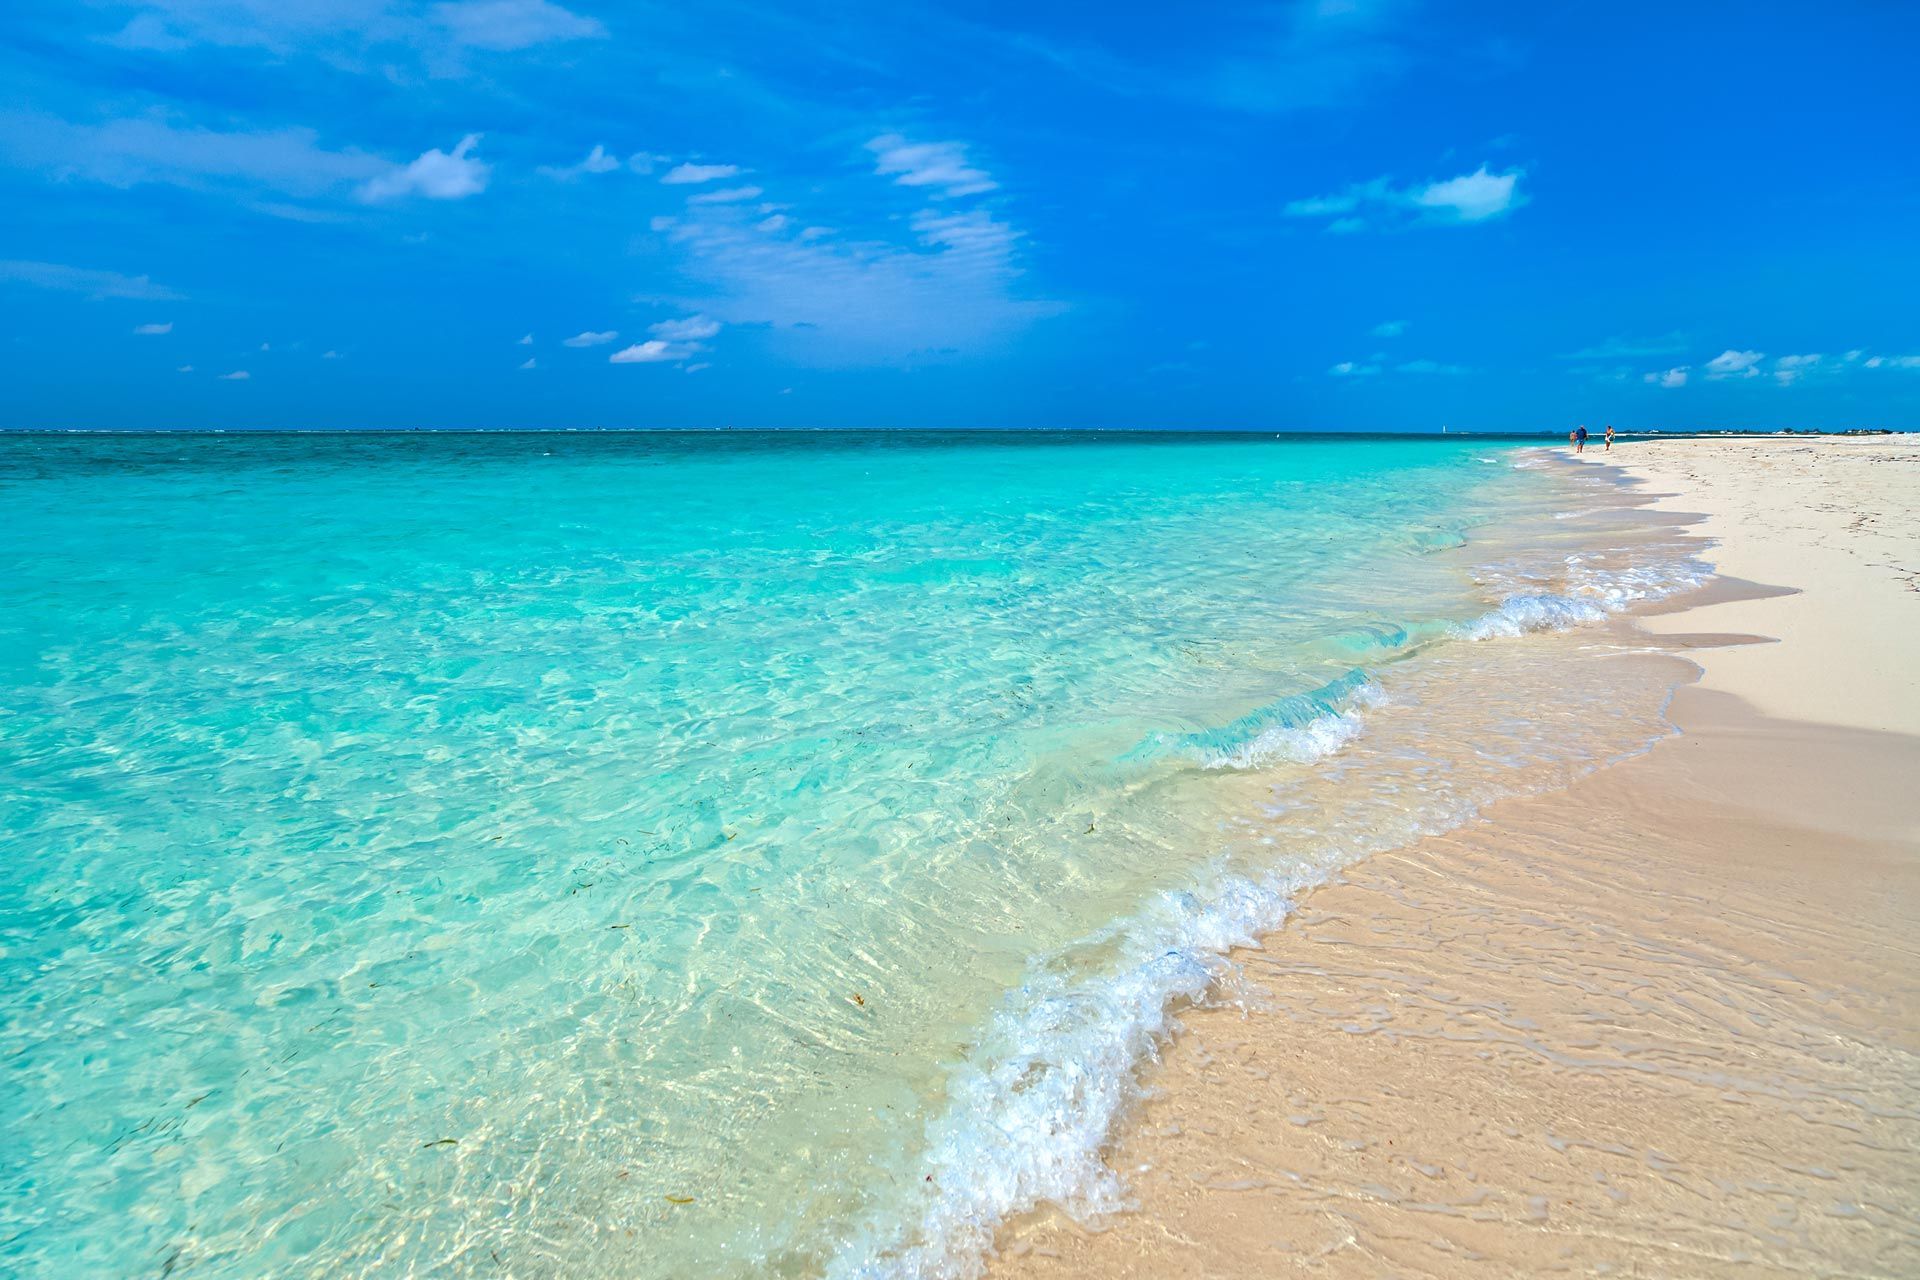 Jamaica Or Turks & Caicos For A Family Vacation? Weâ€™ve Got Tips On How To Decide!